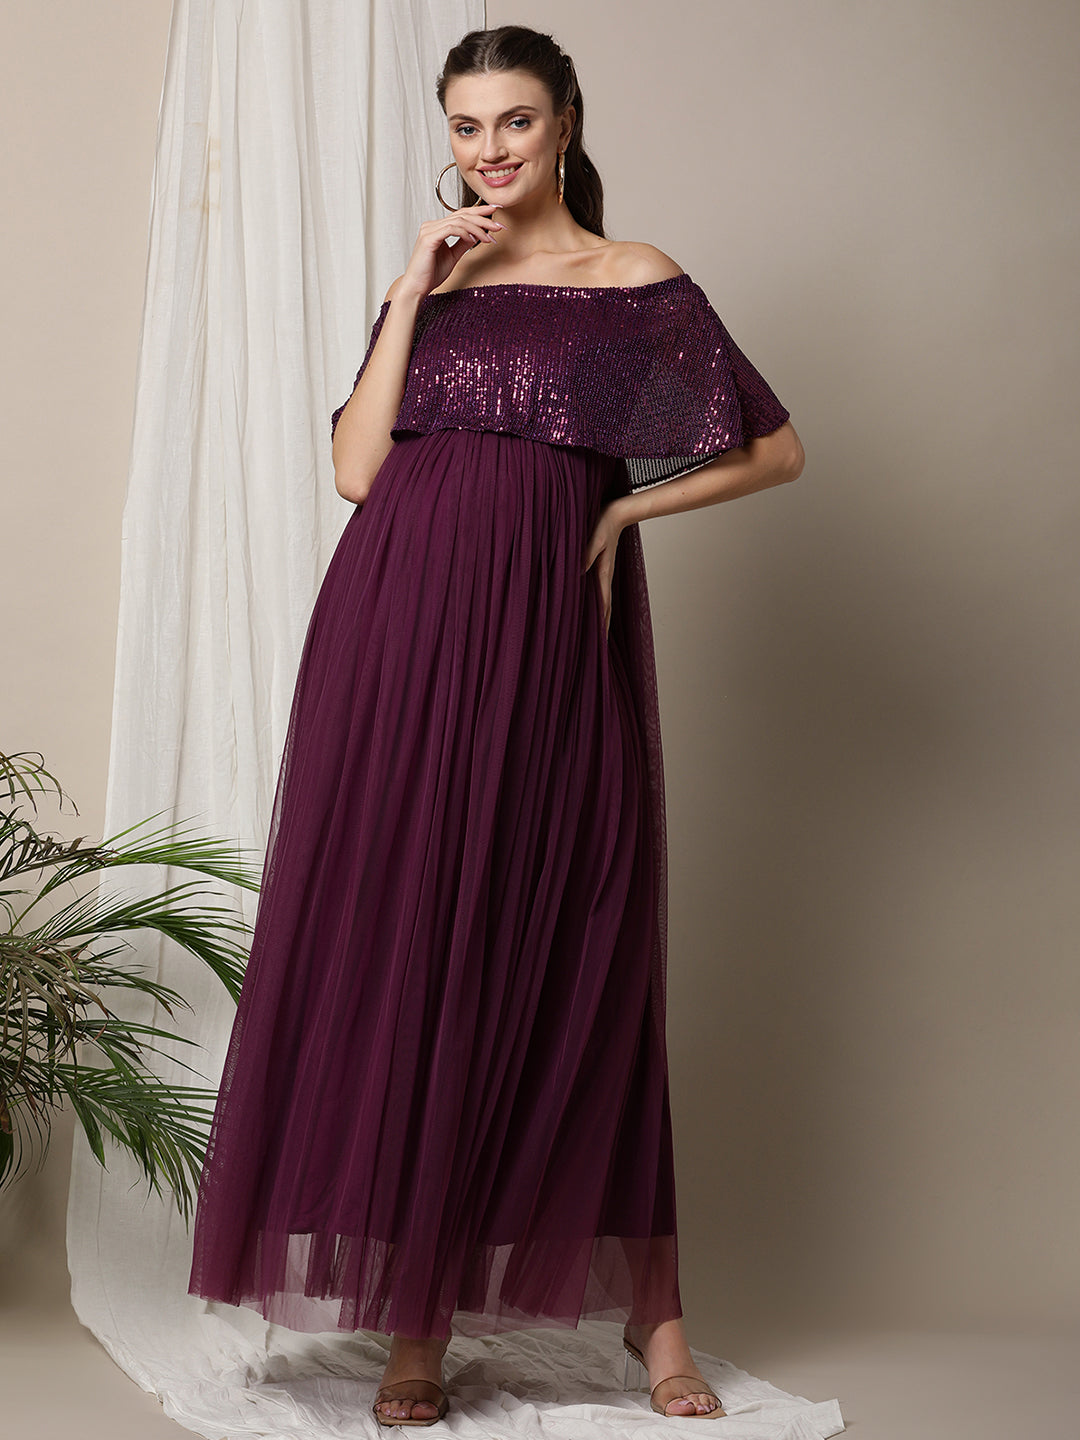 Off Shoulder Orange Maternity Maternity Prom Dresses With Ruffles And Long  Sleeves Perfect For Photoshoots, Baby Showers, And Special Occasions From  Penomise, $88.65 | DHgate.Com